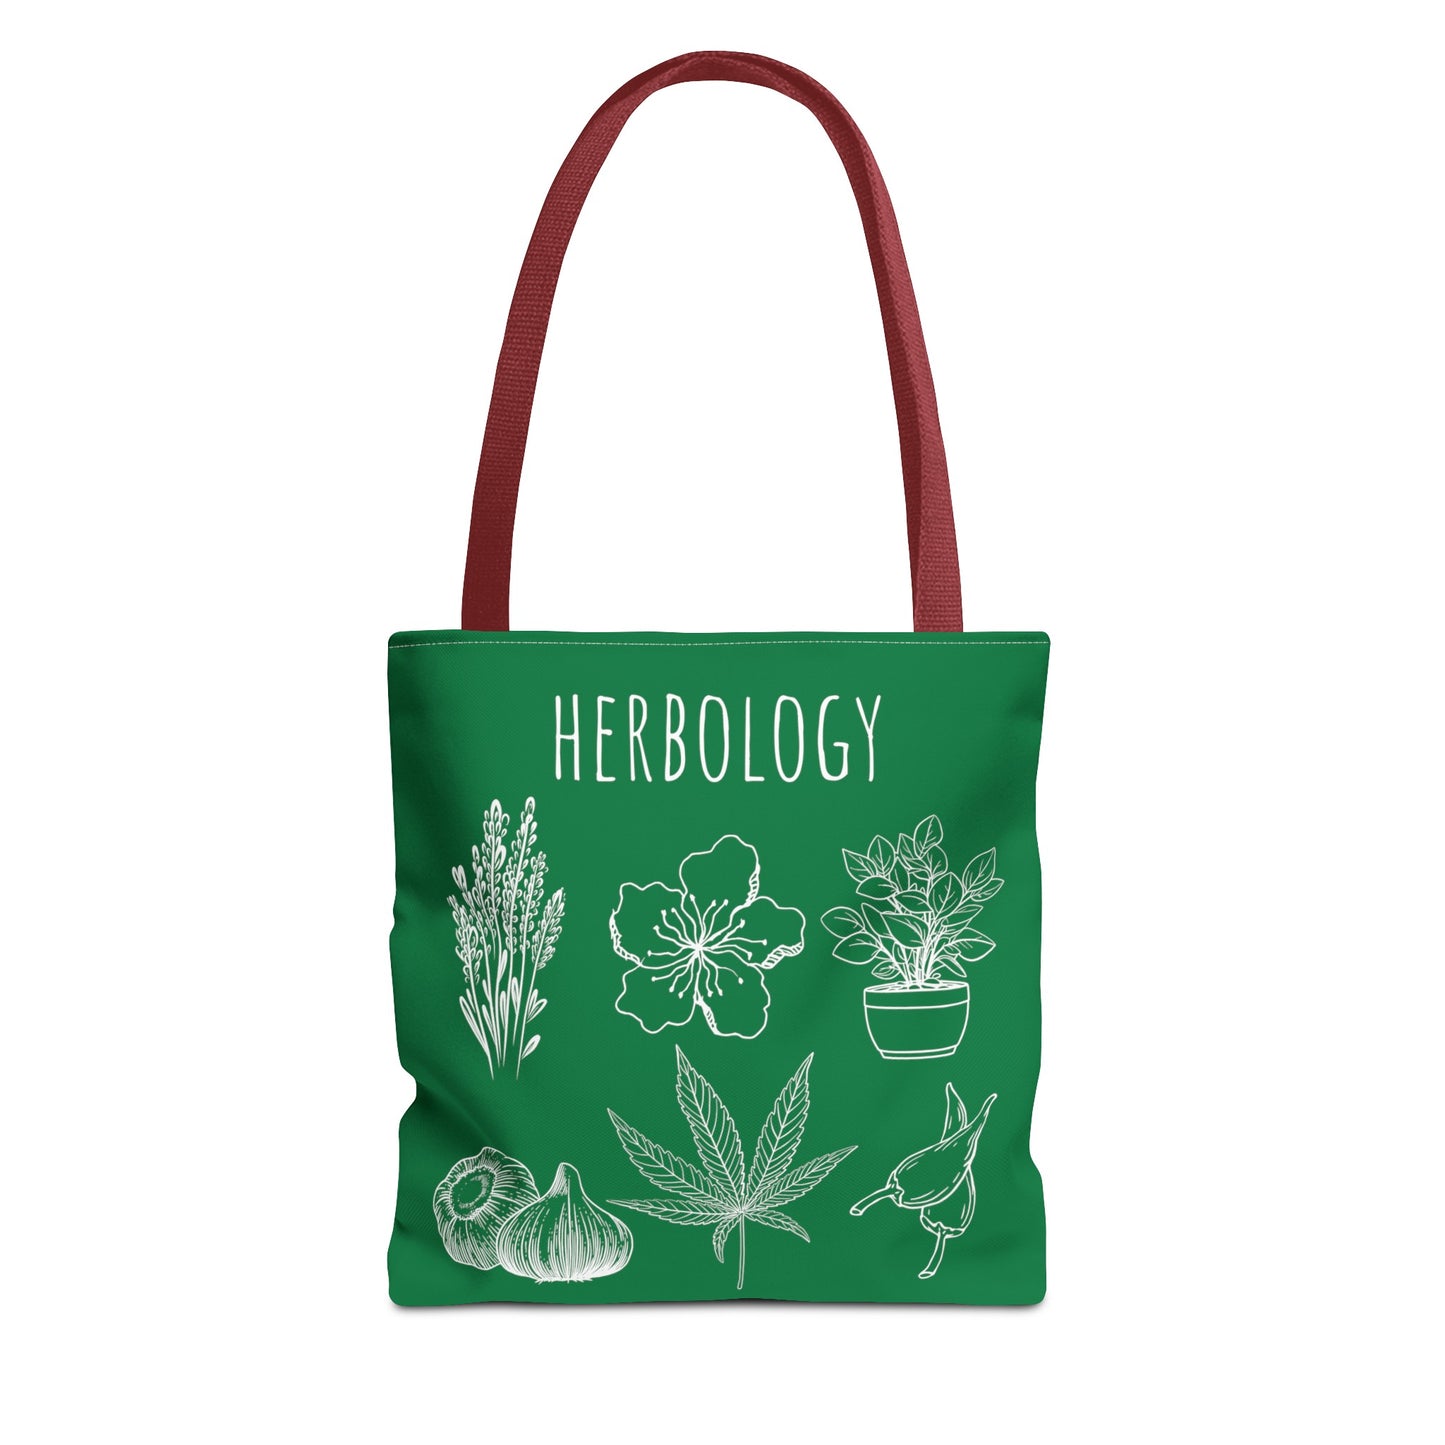 Herbology Tote Bag (Magical Studies Collection)